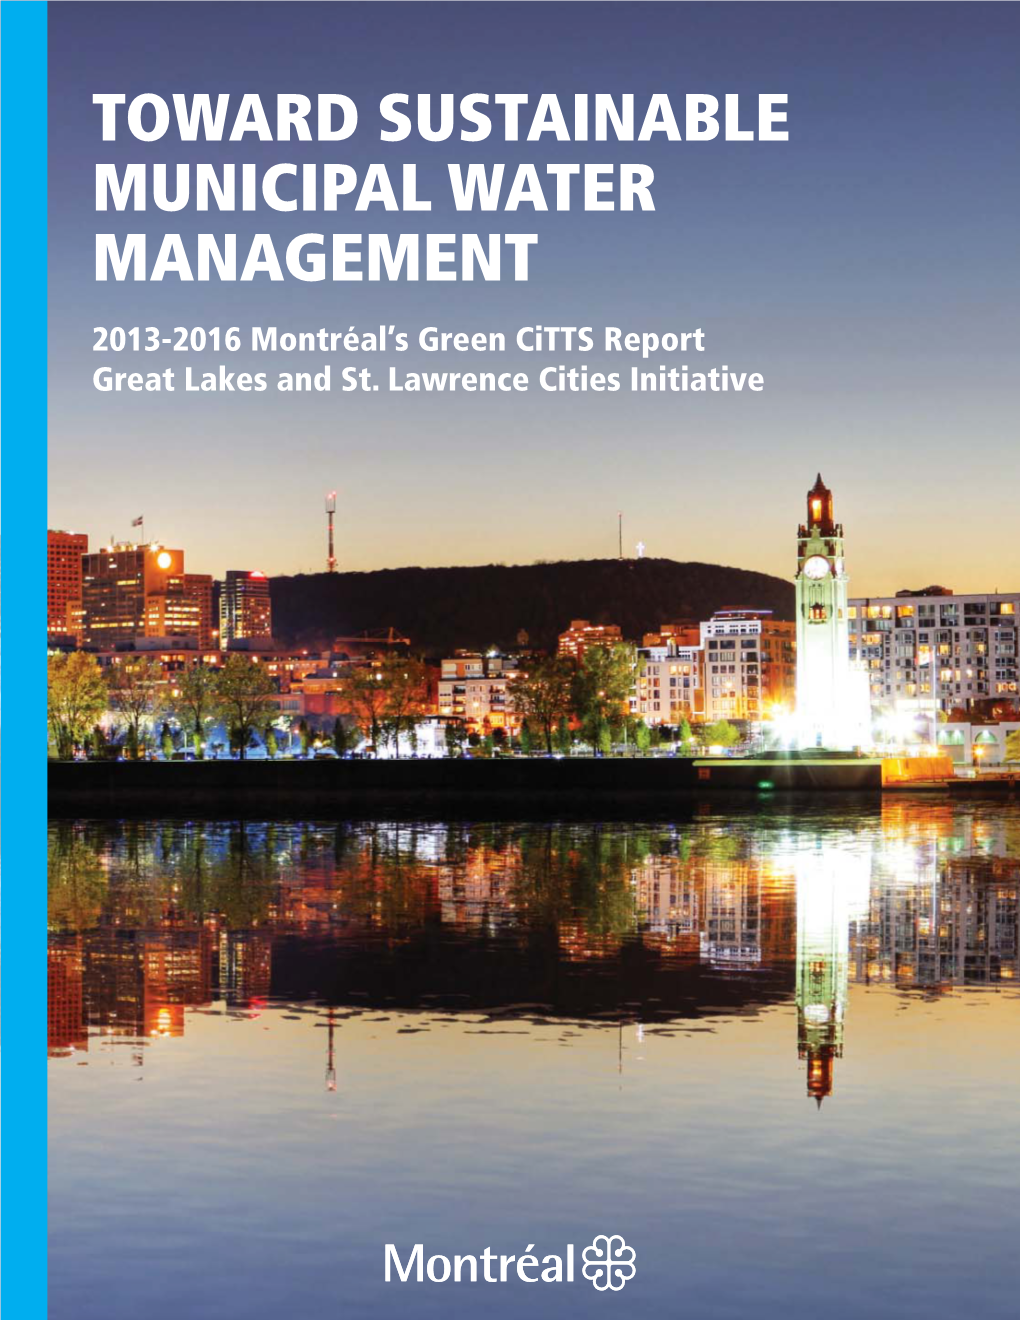 TOWARD SUSTAINABLE MUNICIPAL WATER MANAGEMENT 2013-2016 Montréal’S Green Citts Report Great Lakes and St